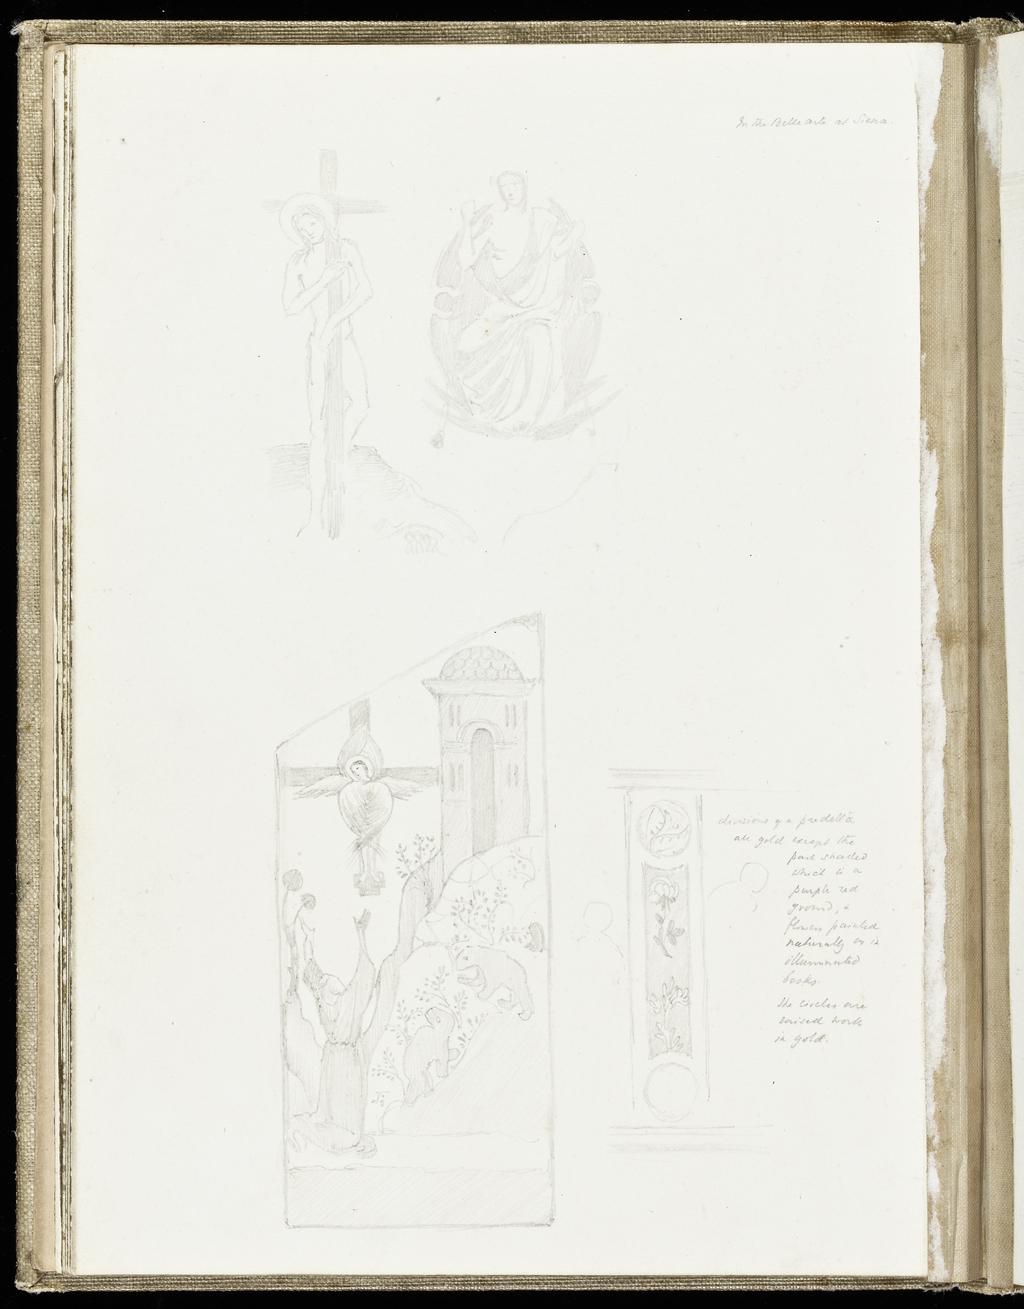 An image of Sketchbook. Recto: Sketch of two galloping horsemen. Verso: Sketches of Christ holding his cross and Christ enthroned; below, copy of 'St Frances receiving the Stigmata' from the School of Guido de Siena at the Pinacoteca di Belli Arte; to right, a division of a predella. Burne-Jones, Edward (British, 1833-1898). Coverboards covered with white linen. Front cover has horizontal slits at the upper and lower right sides. Off-white paper. Collocation: each sheet is separately taped to the binding; there are 28ff and a single beige sheet on either side of these. Front and back leaves are blank, recto and verso. Height, sheet size, 179 mm, width, sheet size, 254, mm, 1873.